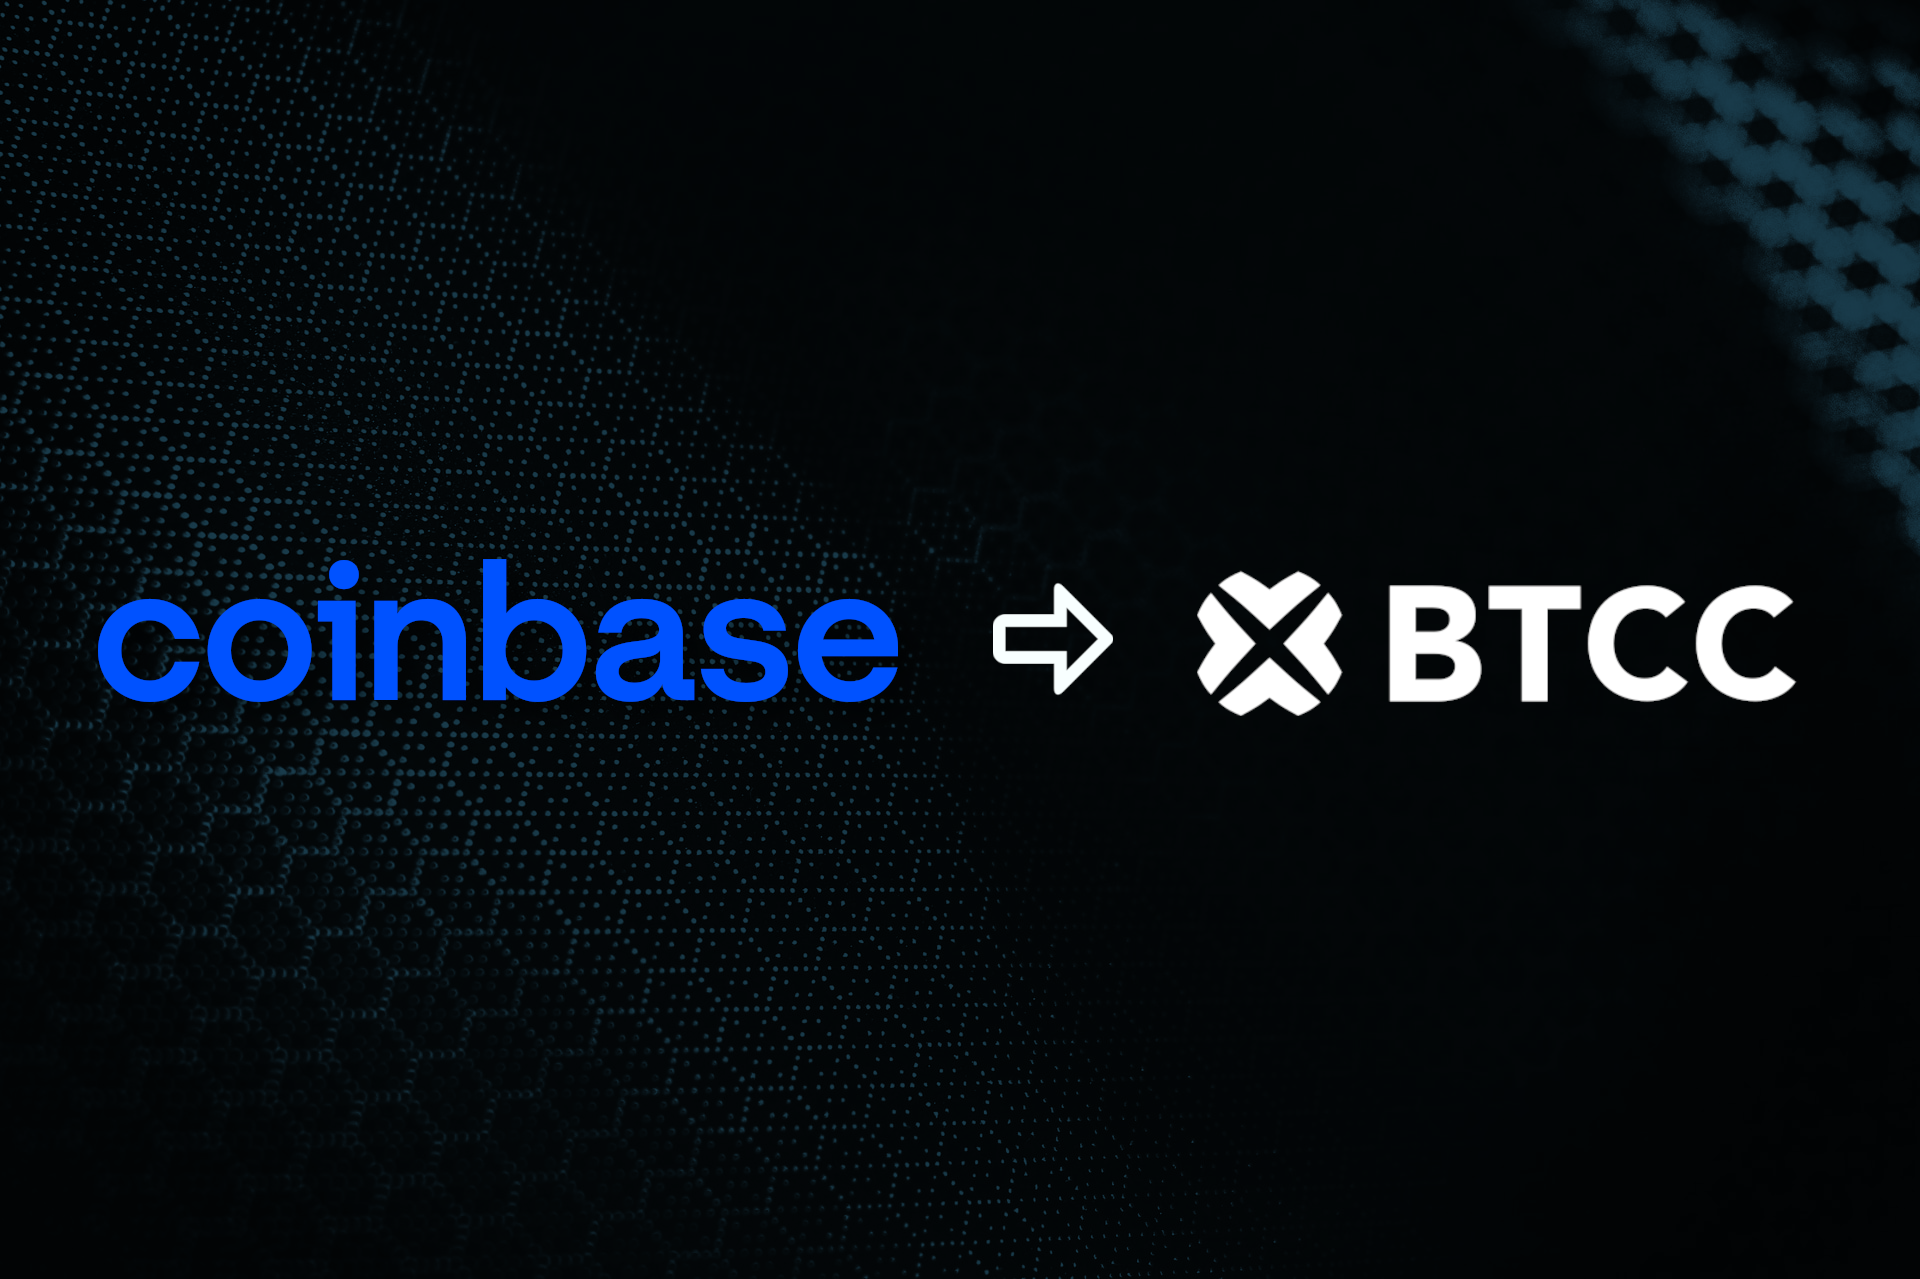 How to transfer crypto from Coinbase to BTCC?